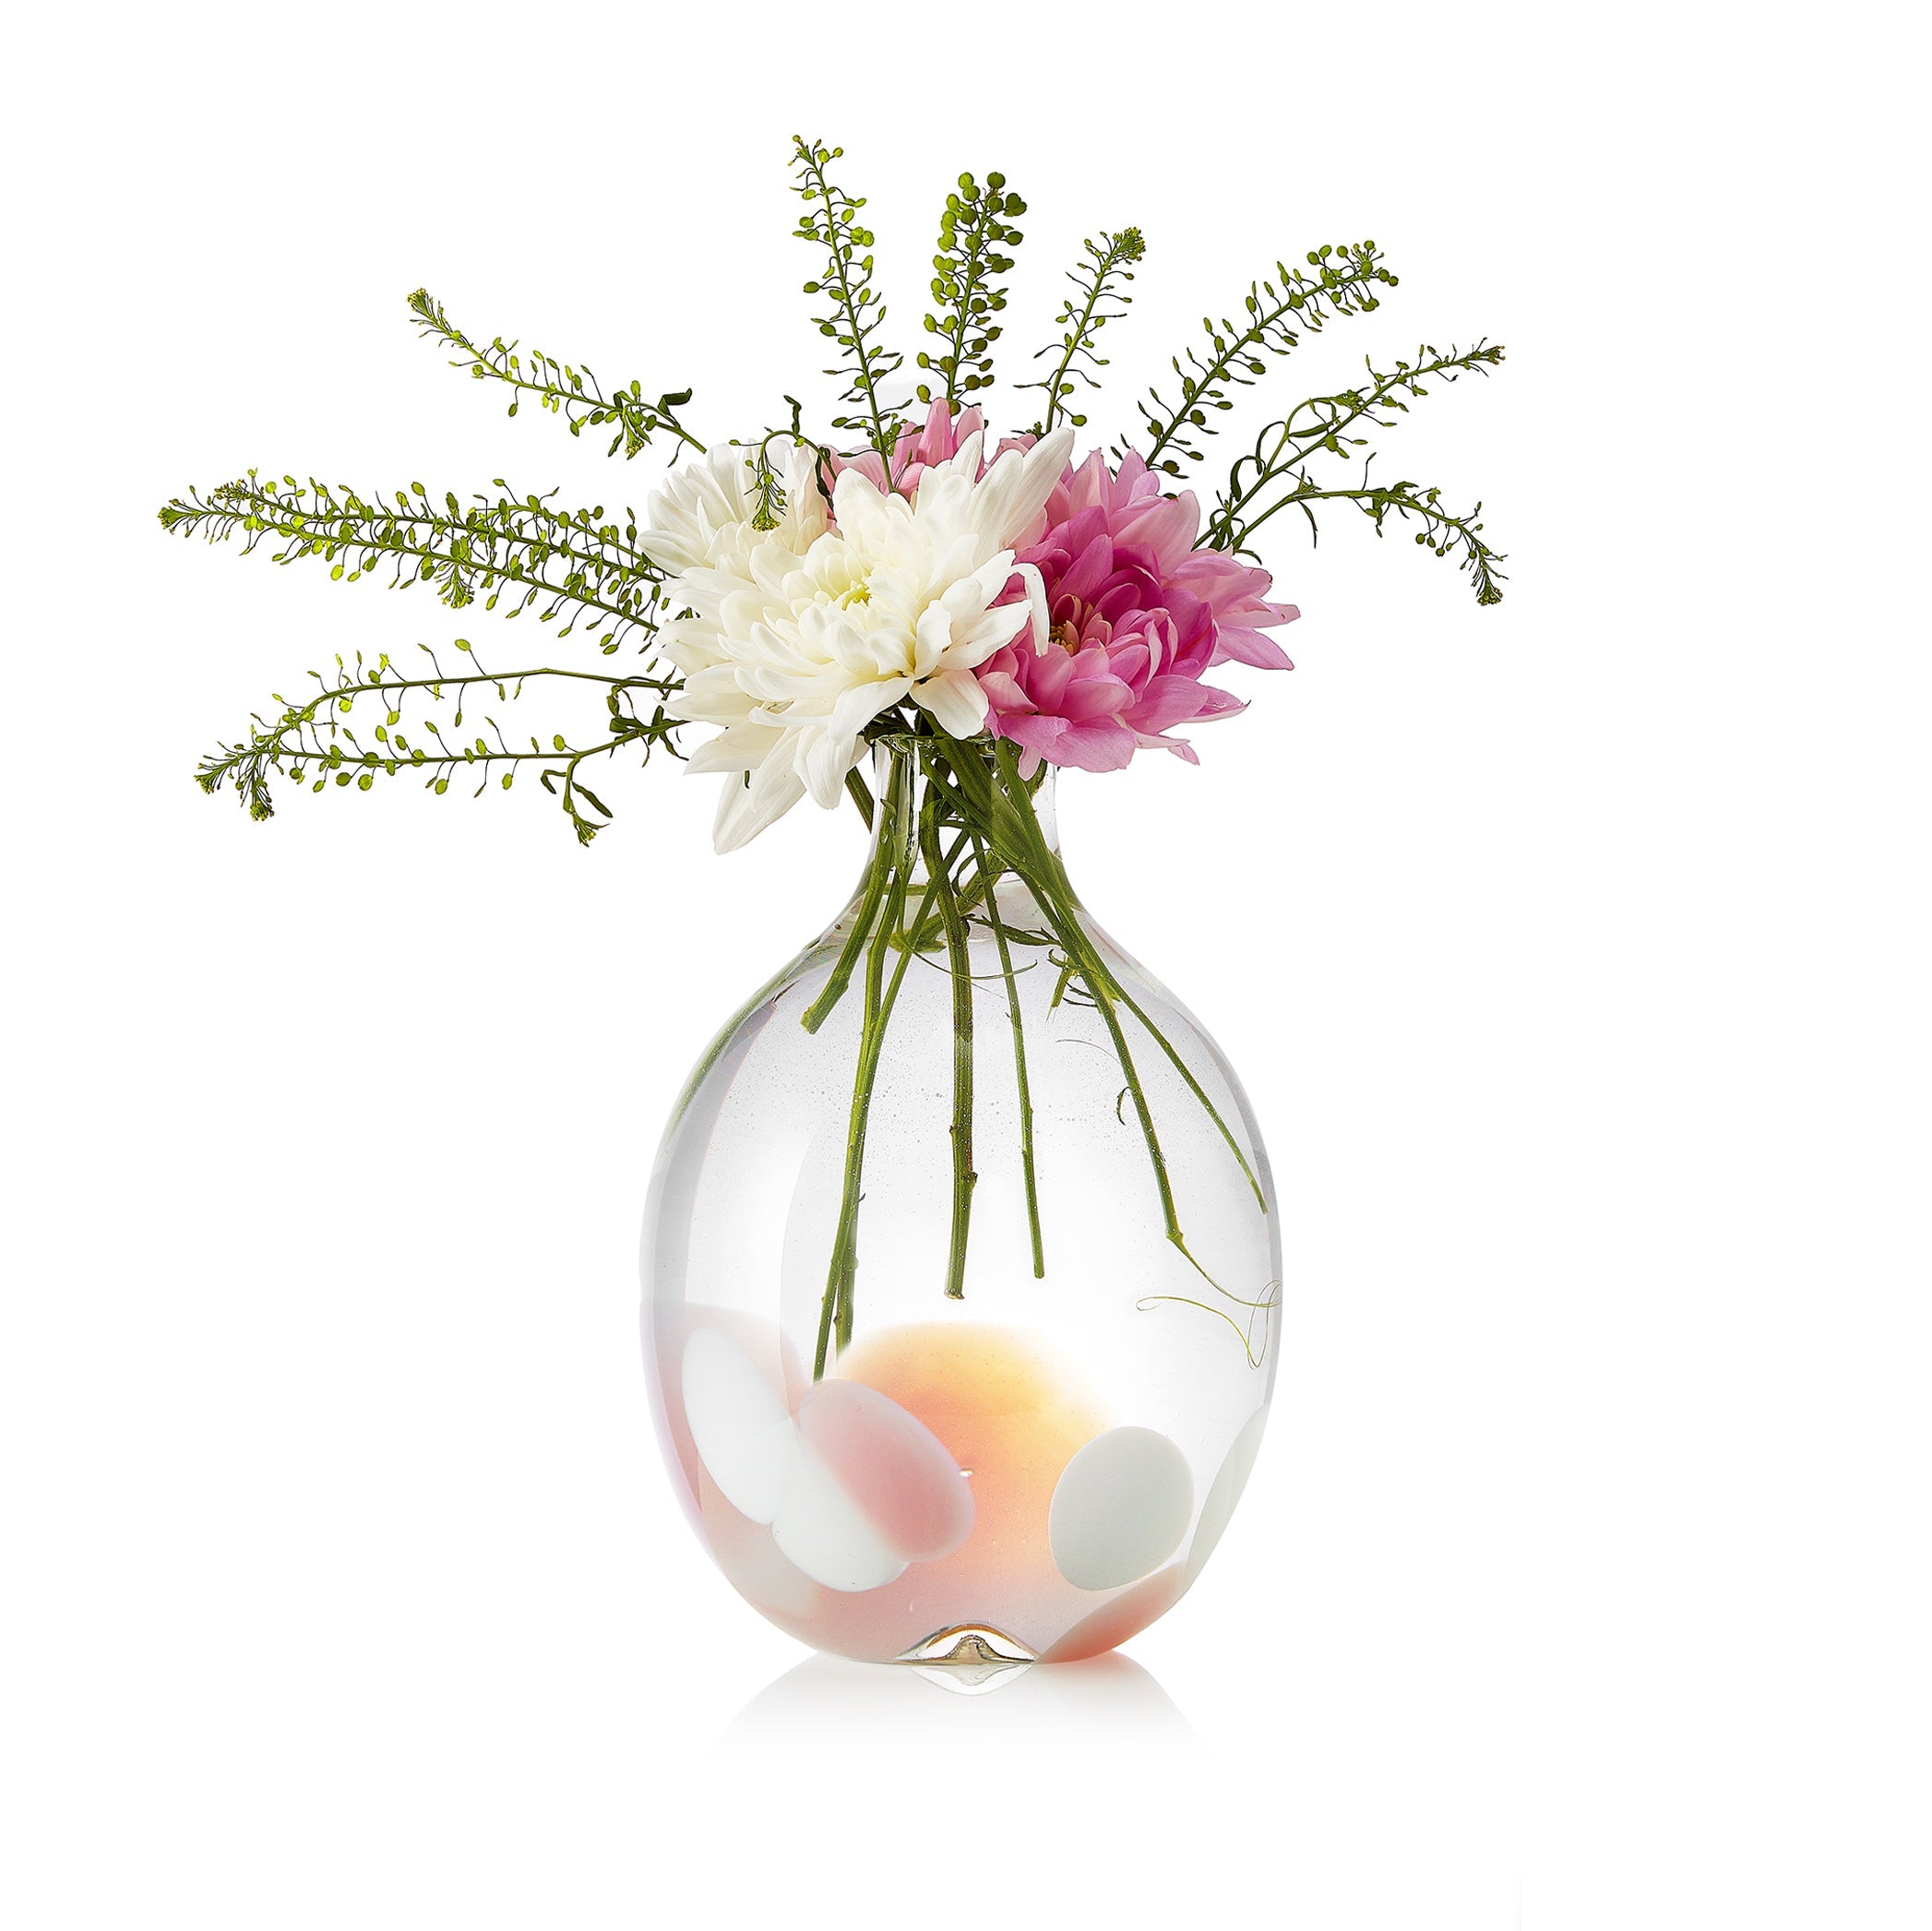 Handblown 'Spotted' Glass Vase in Rose Pink & White, 18cm x 13cm